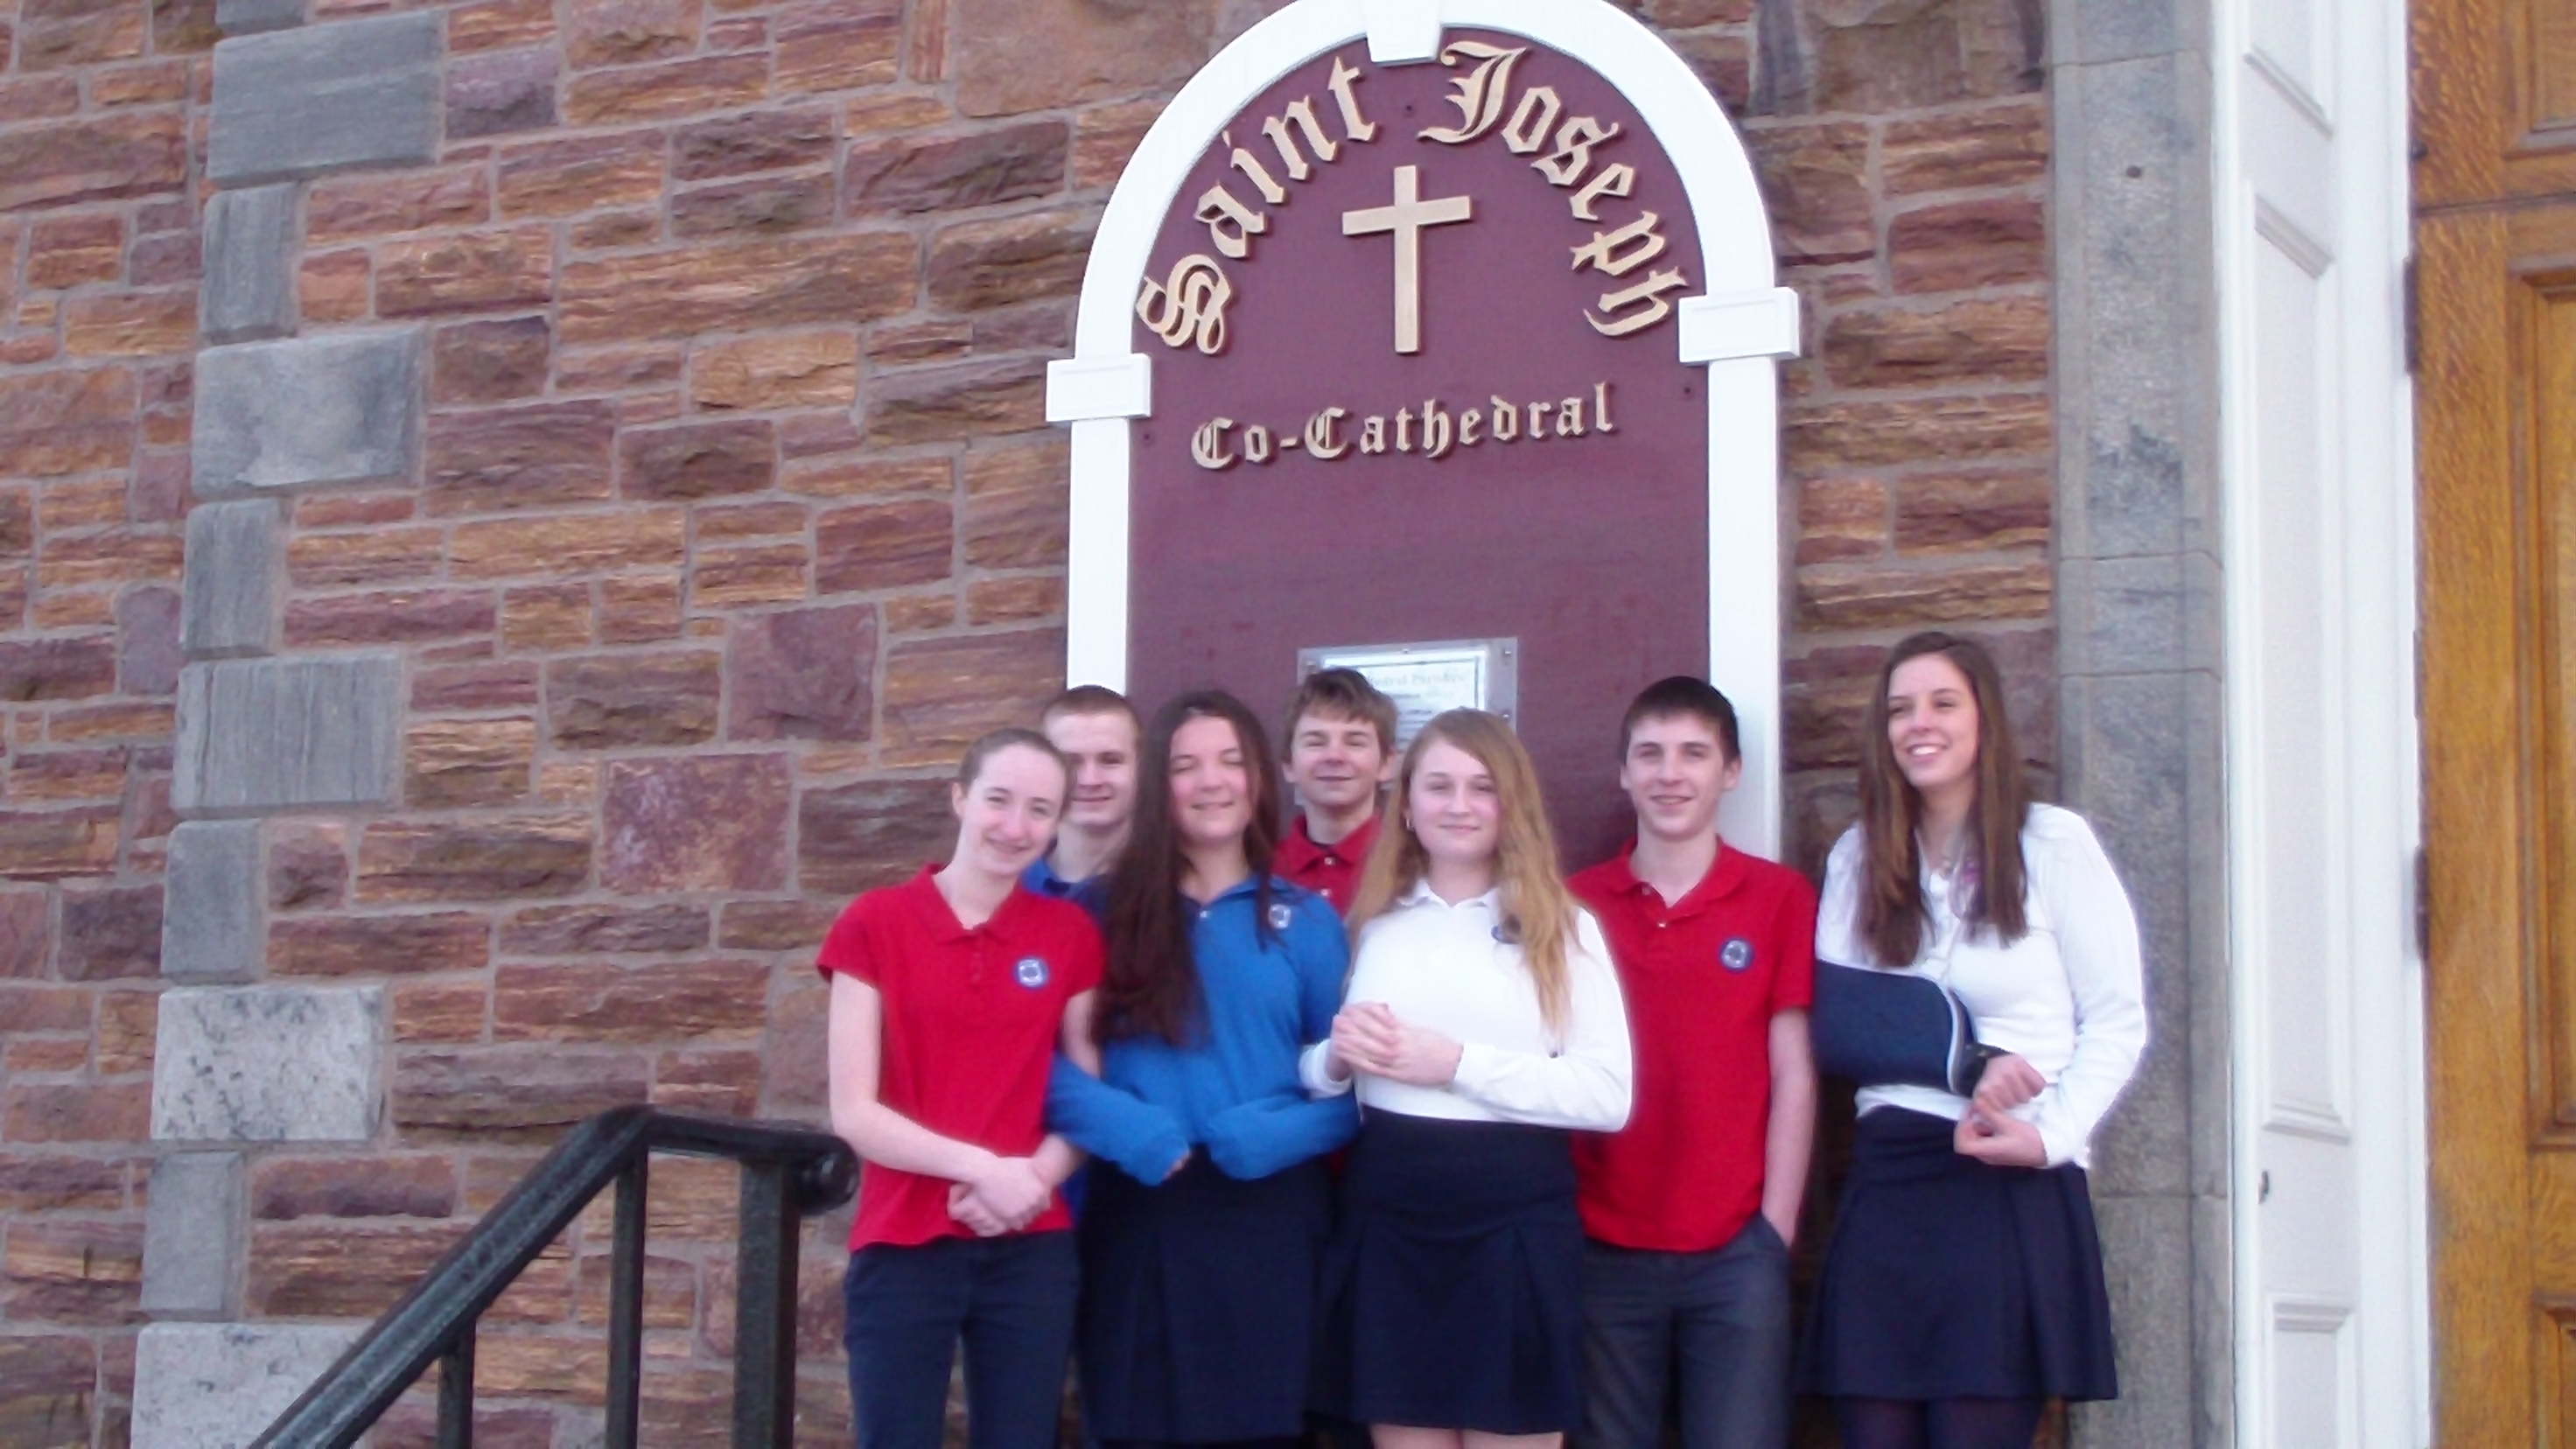 Students attended the Chrism Mass celebrated by Bishop Coyne on Tues. of Holy Week